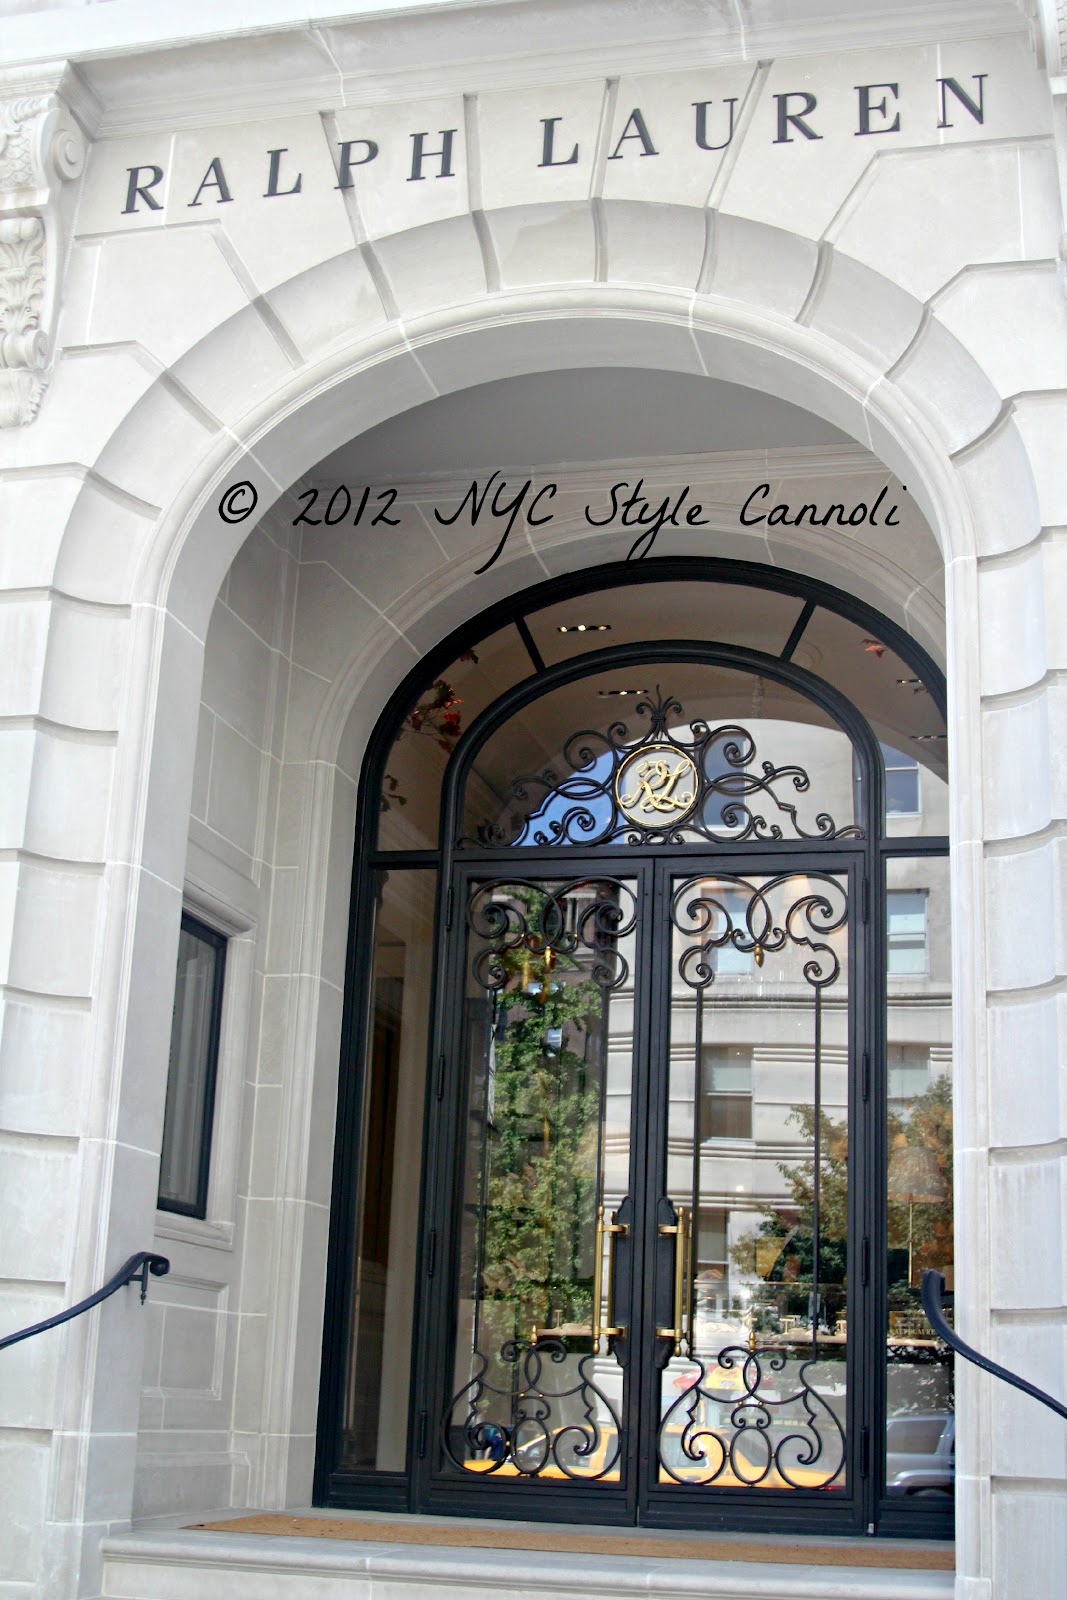 The Upper East Side Ralph Lauren Store | NYC, Style & a little Cannoli